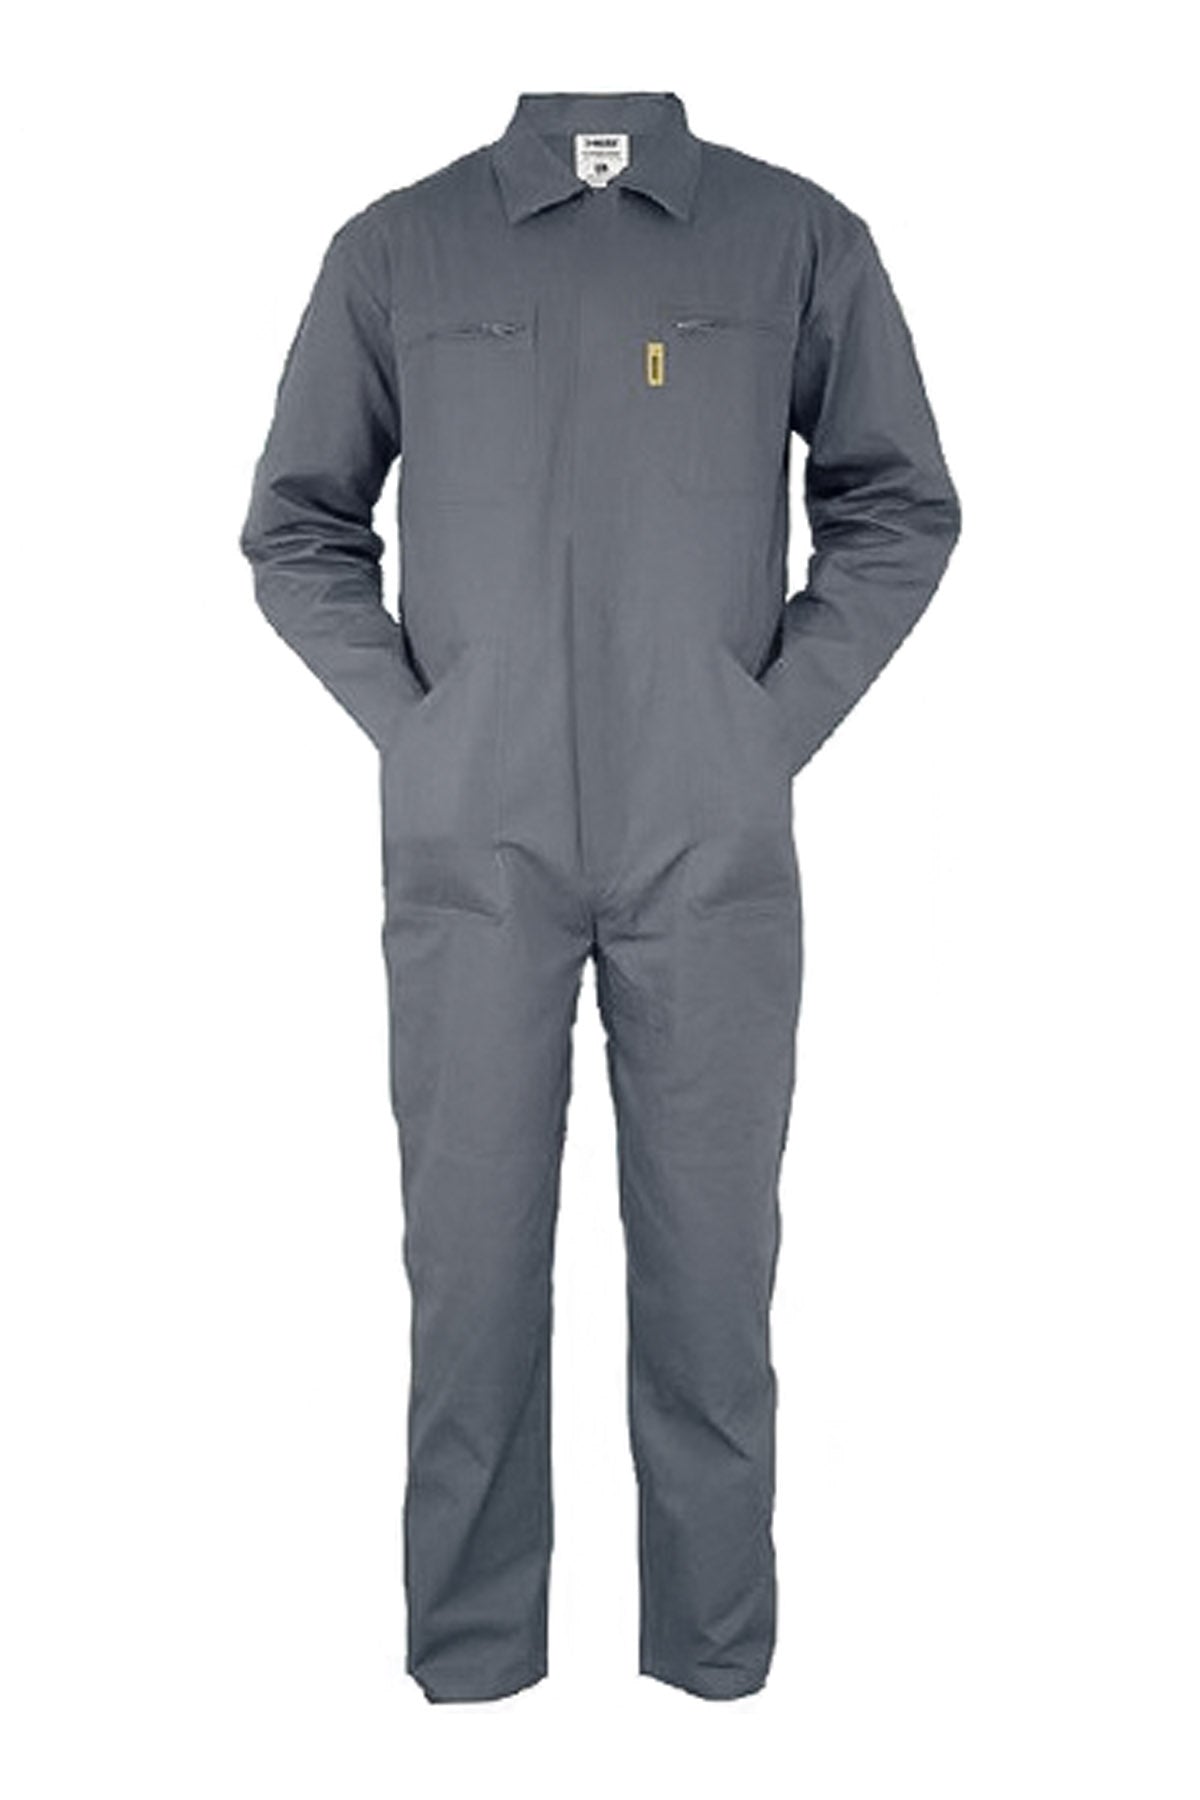 SGS Grey Complete Work Wear Coverall - SGS703 | Supply Master | Accra, Ghana Safety Clothing Buy Tools hardware Building materials